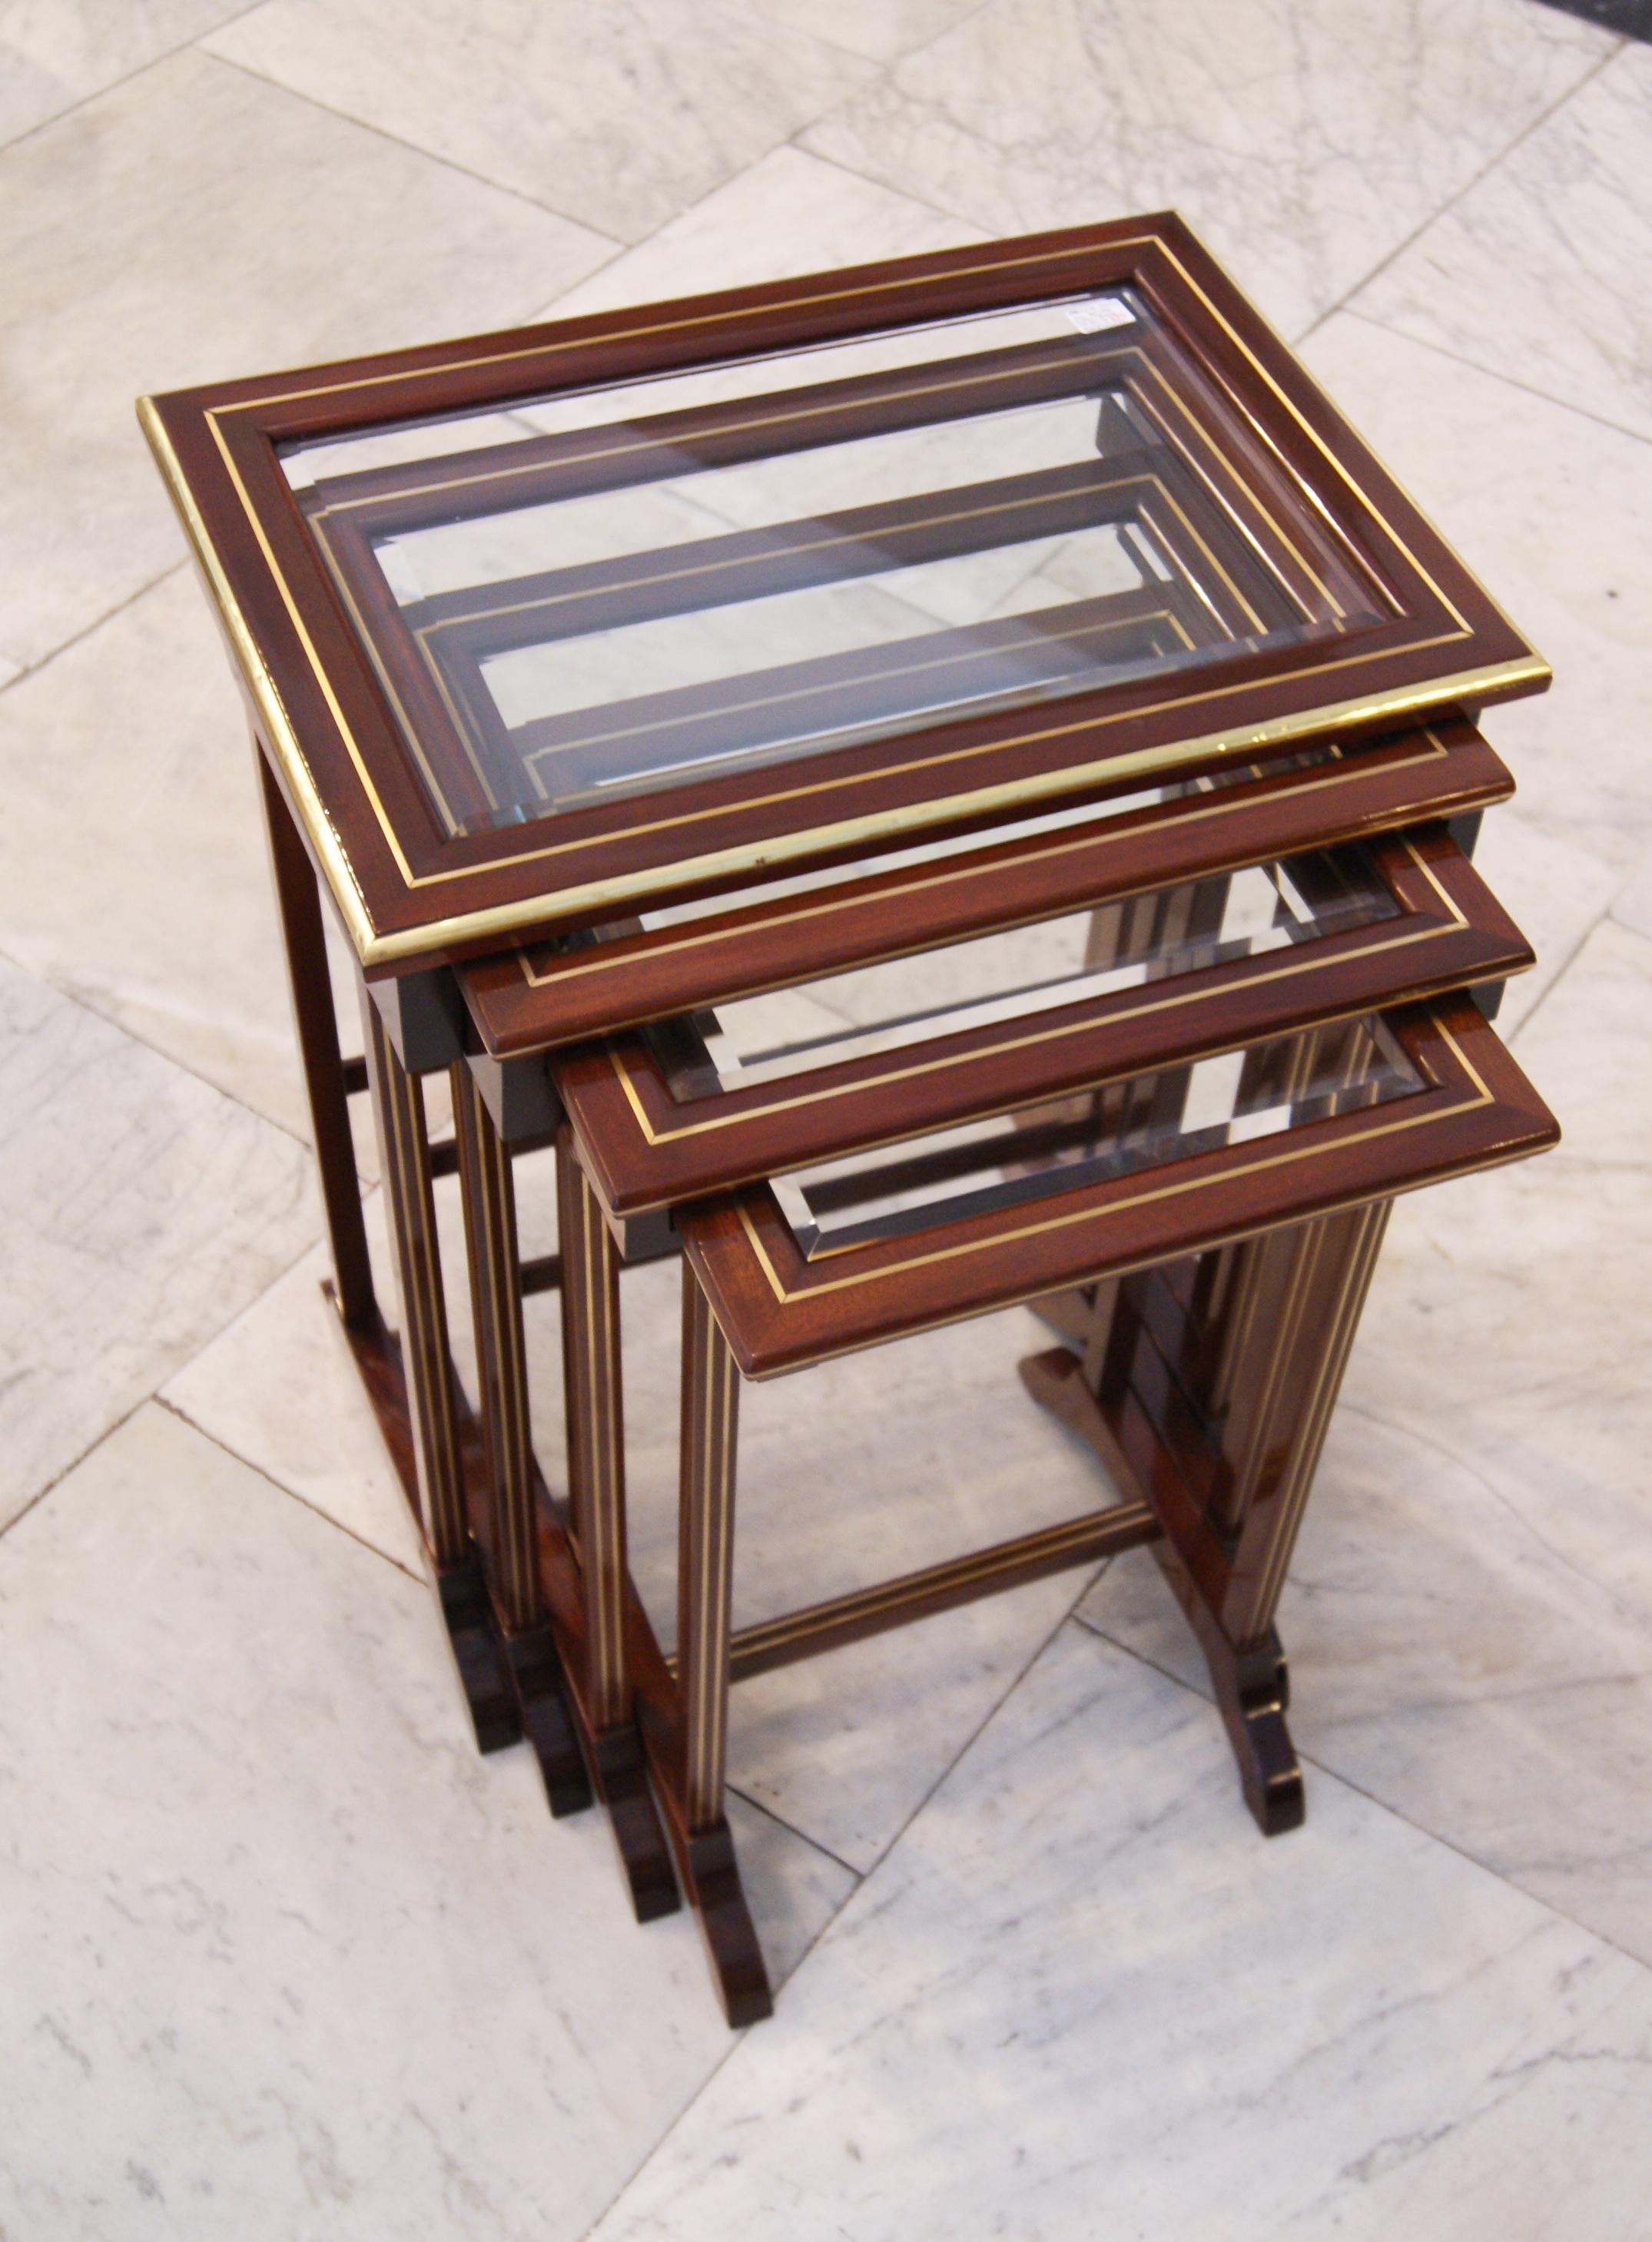 Set of four side tables, Art Nouveau, circa 1900

High quality handwork / beechwood / dark mahogany stained / hand polished
four nesting side tables in different sizes from elegant form type. Each of the tables has a faceted glass plate on top. A